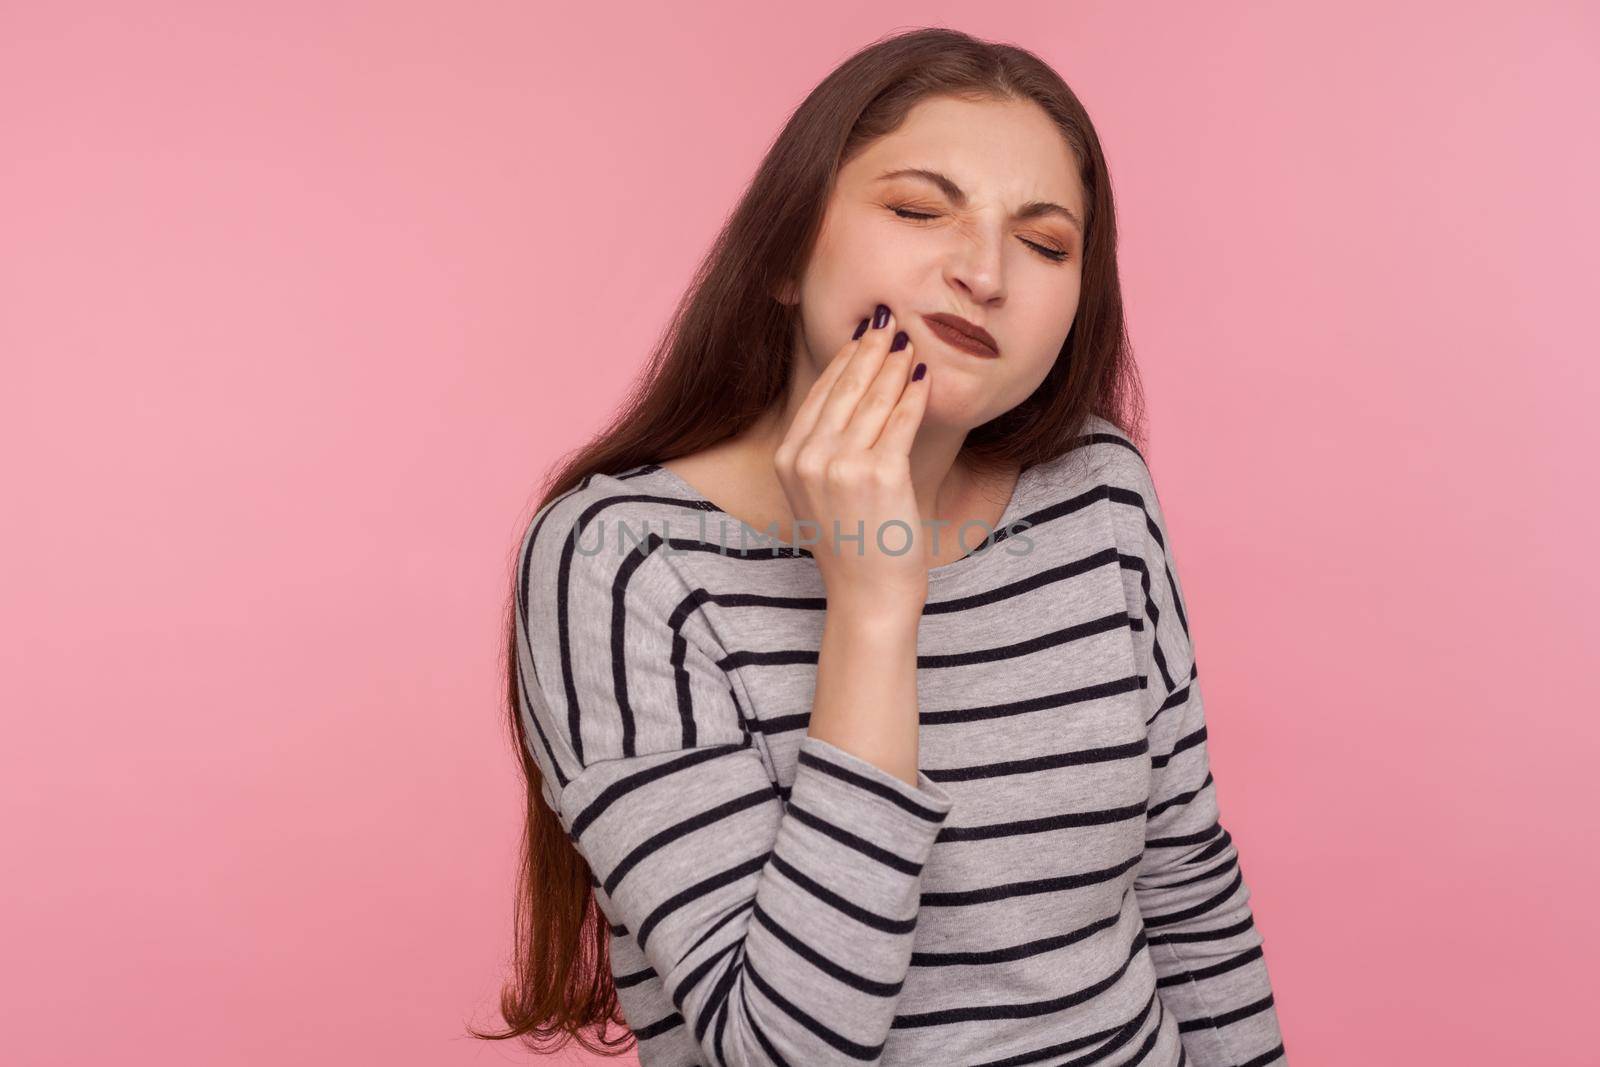 Dental problems. Portrait of unhappy sick woman in striped sweatshirt touching sore cheek, frowning suffering toothache, cavities or sensitive enamel. indoor studio shot isolated on pink background